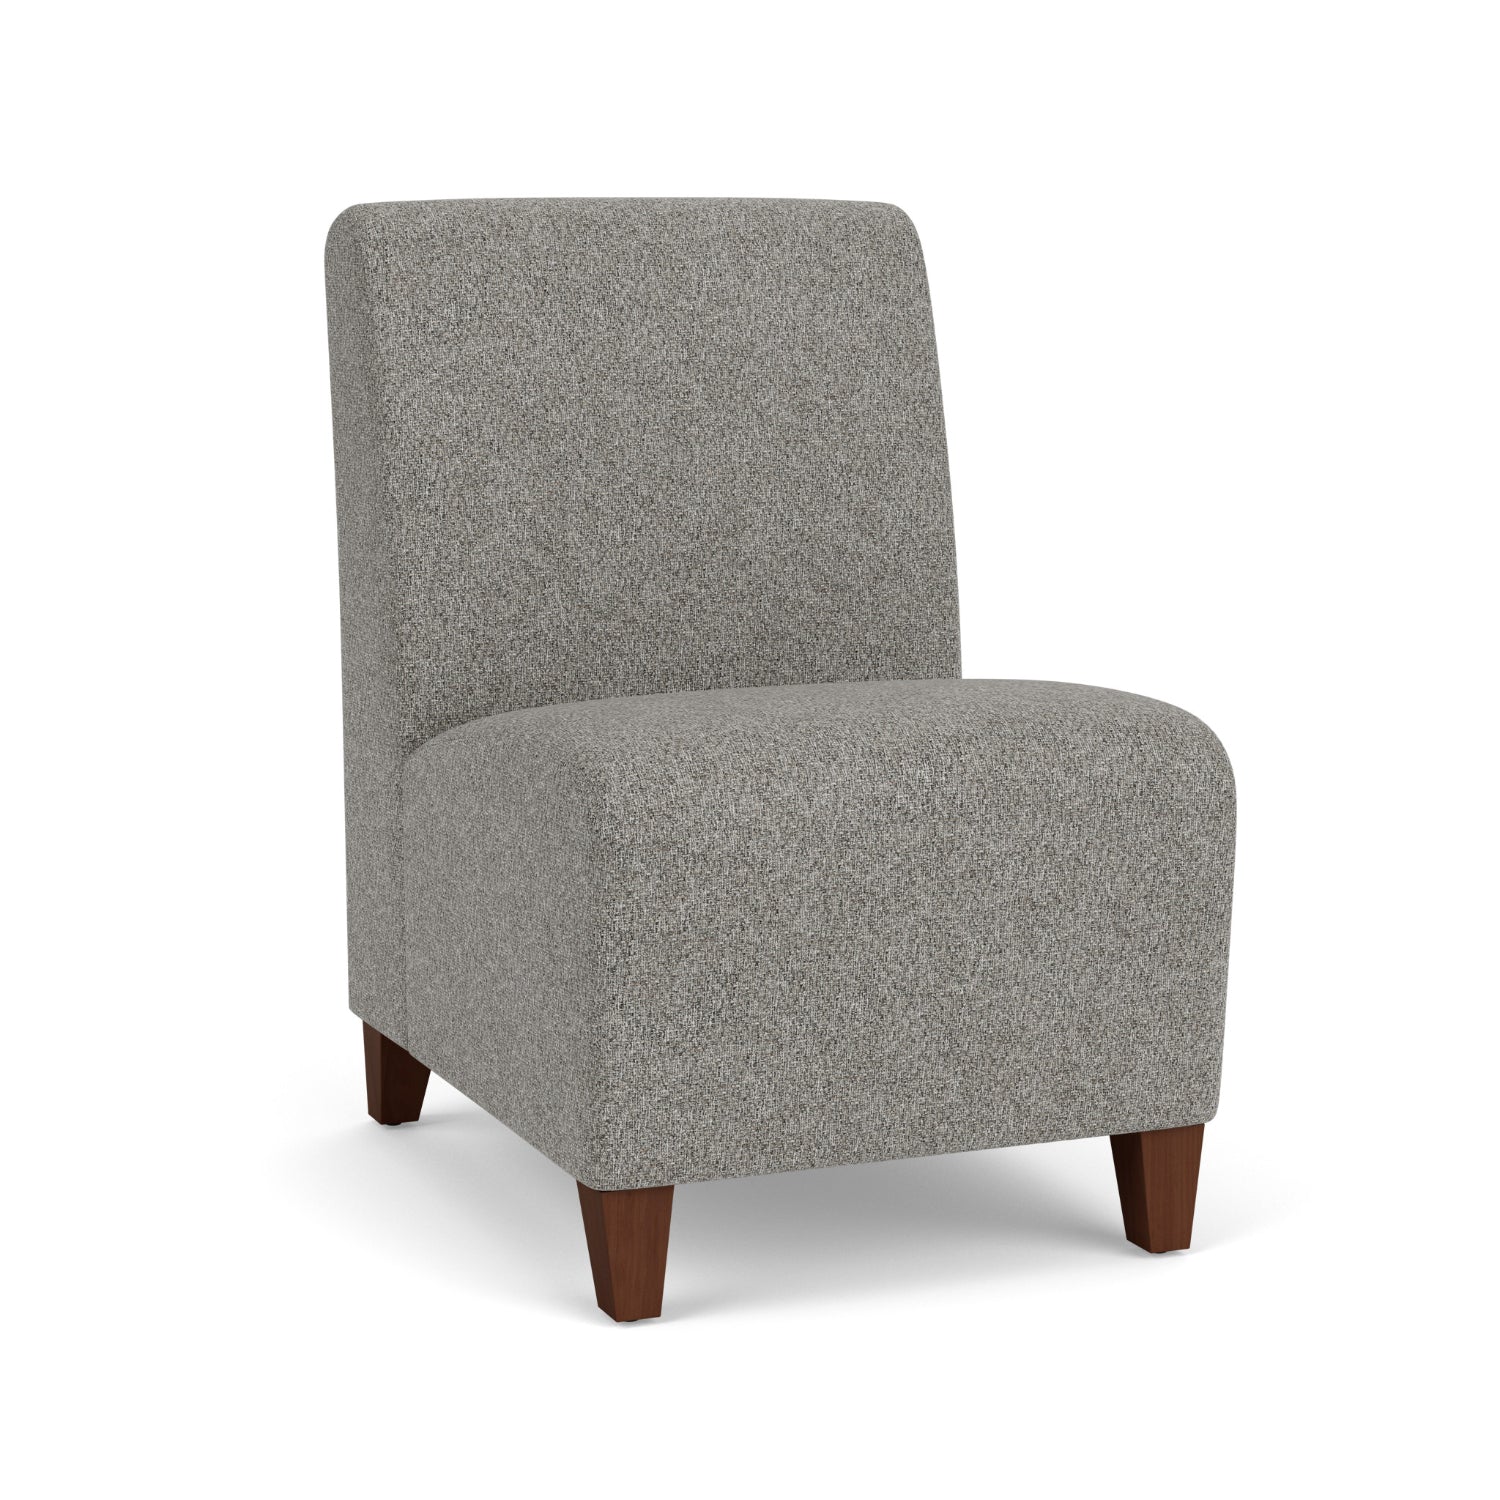 Siena Collection Reception Seating, Armless Guest Chair, Standard Fabric Upholstery, FREE SHIPPING